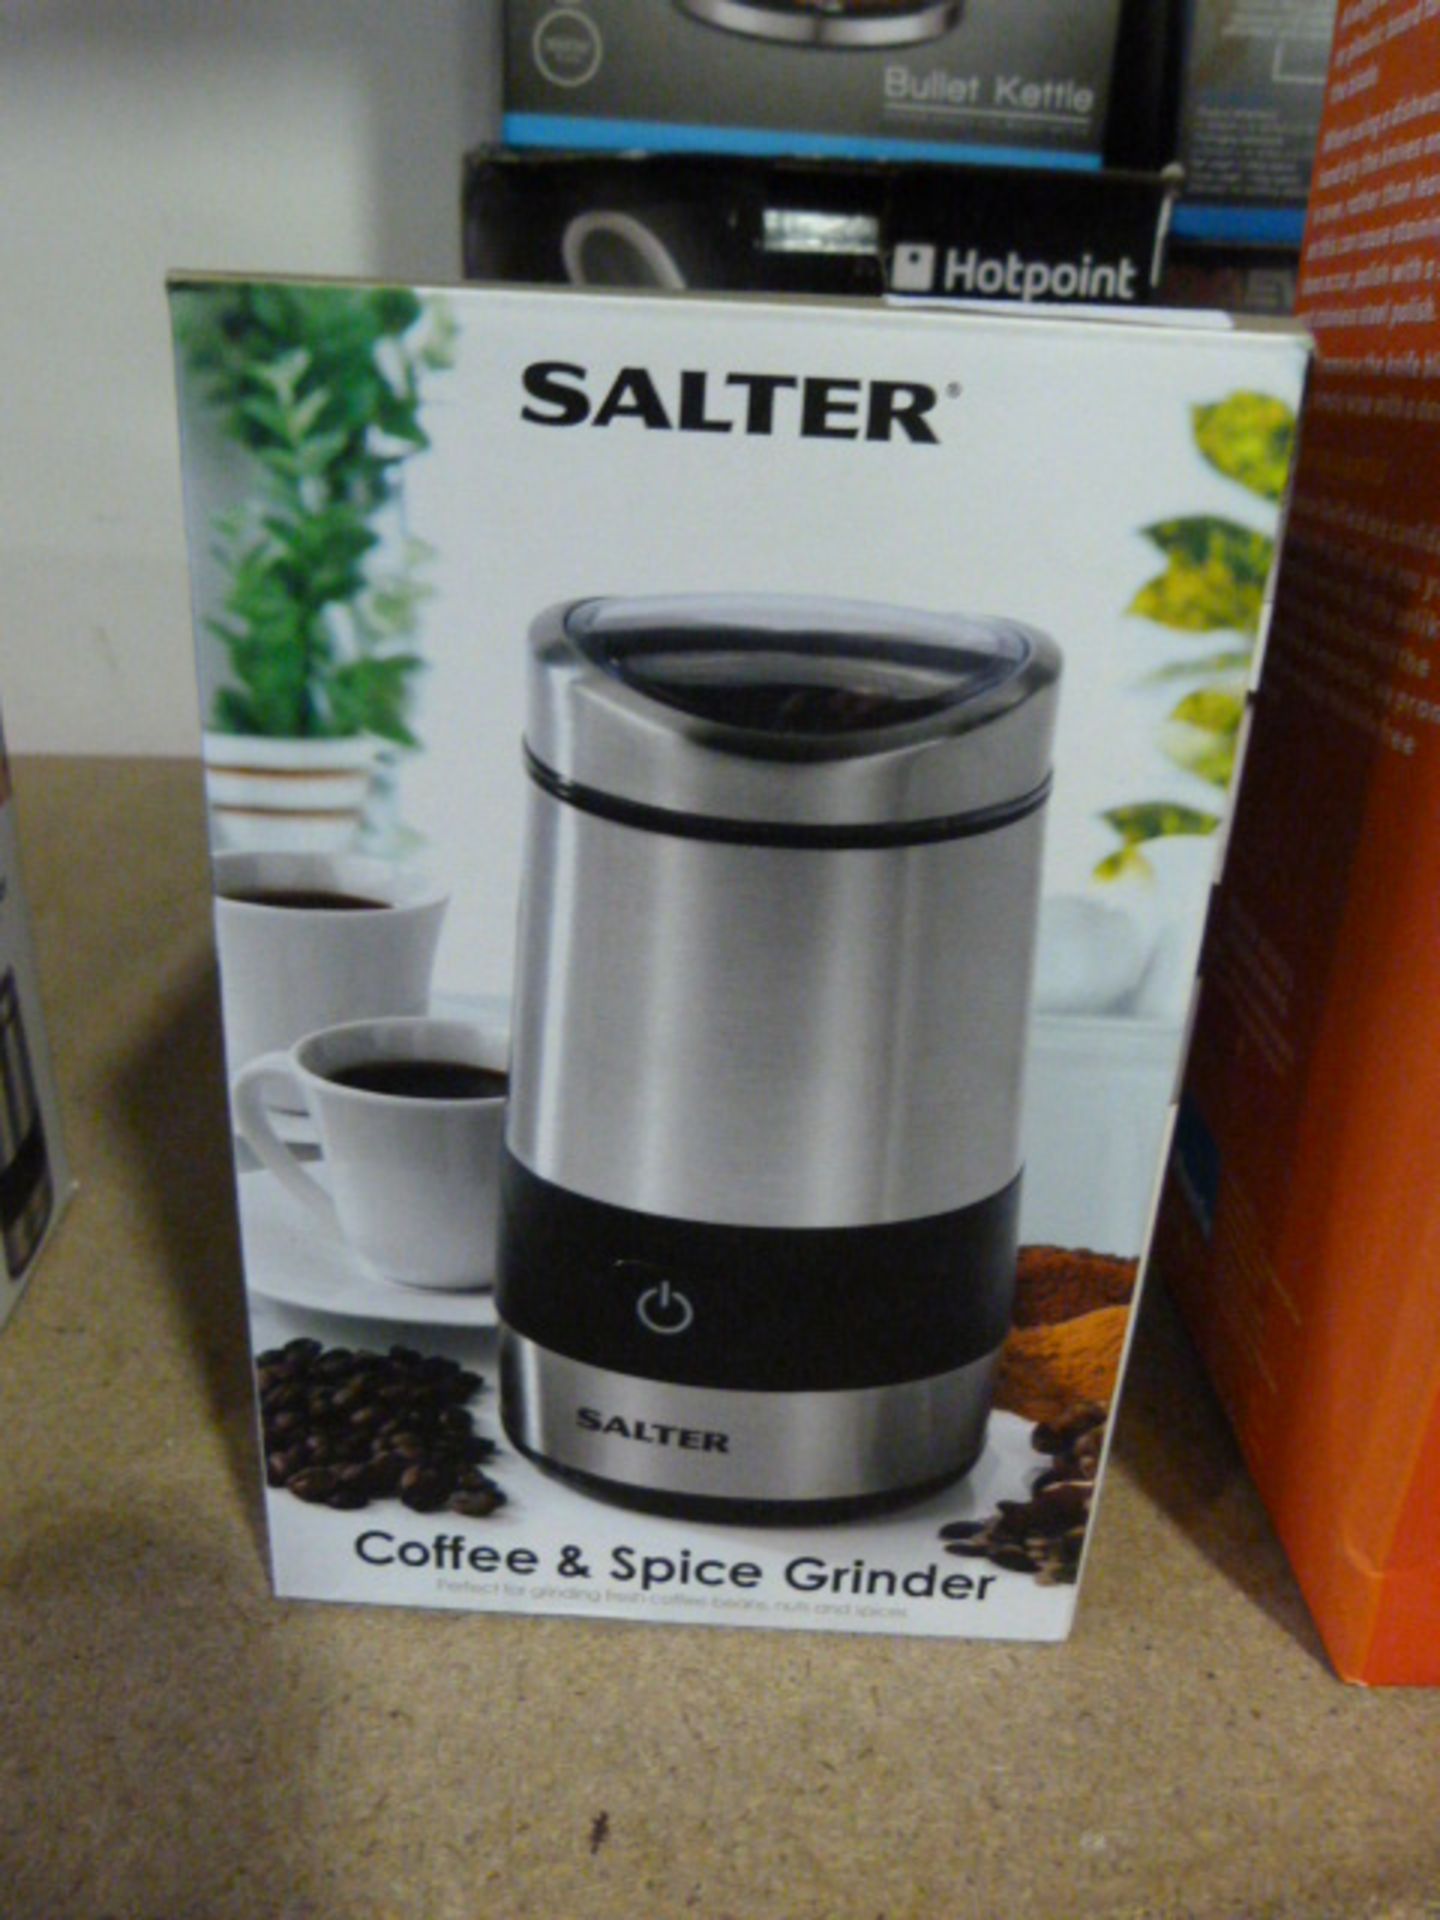 *Salter Coffee and Spice Grinder